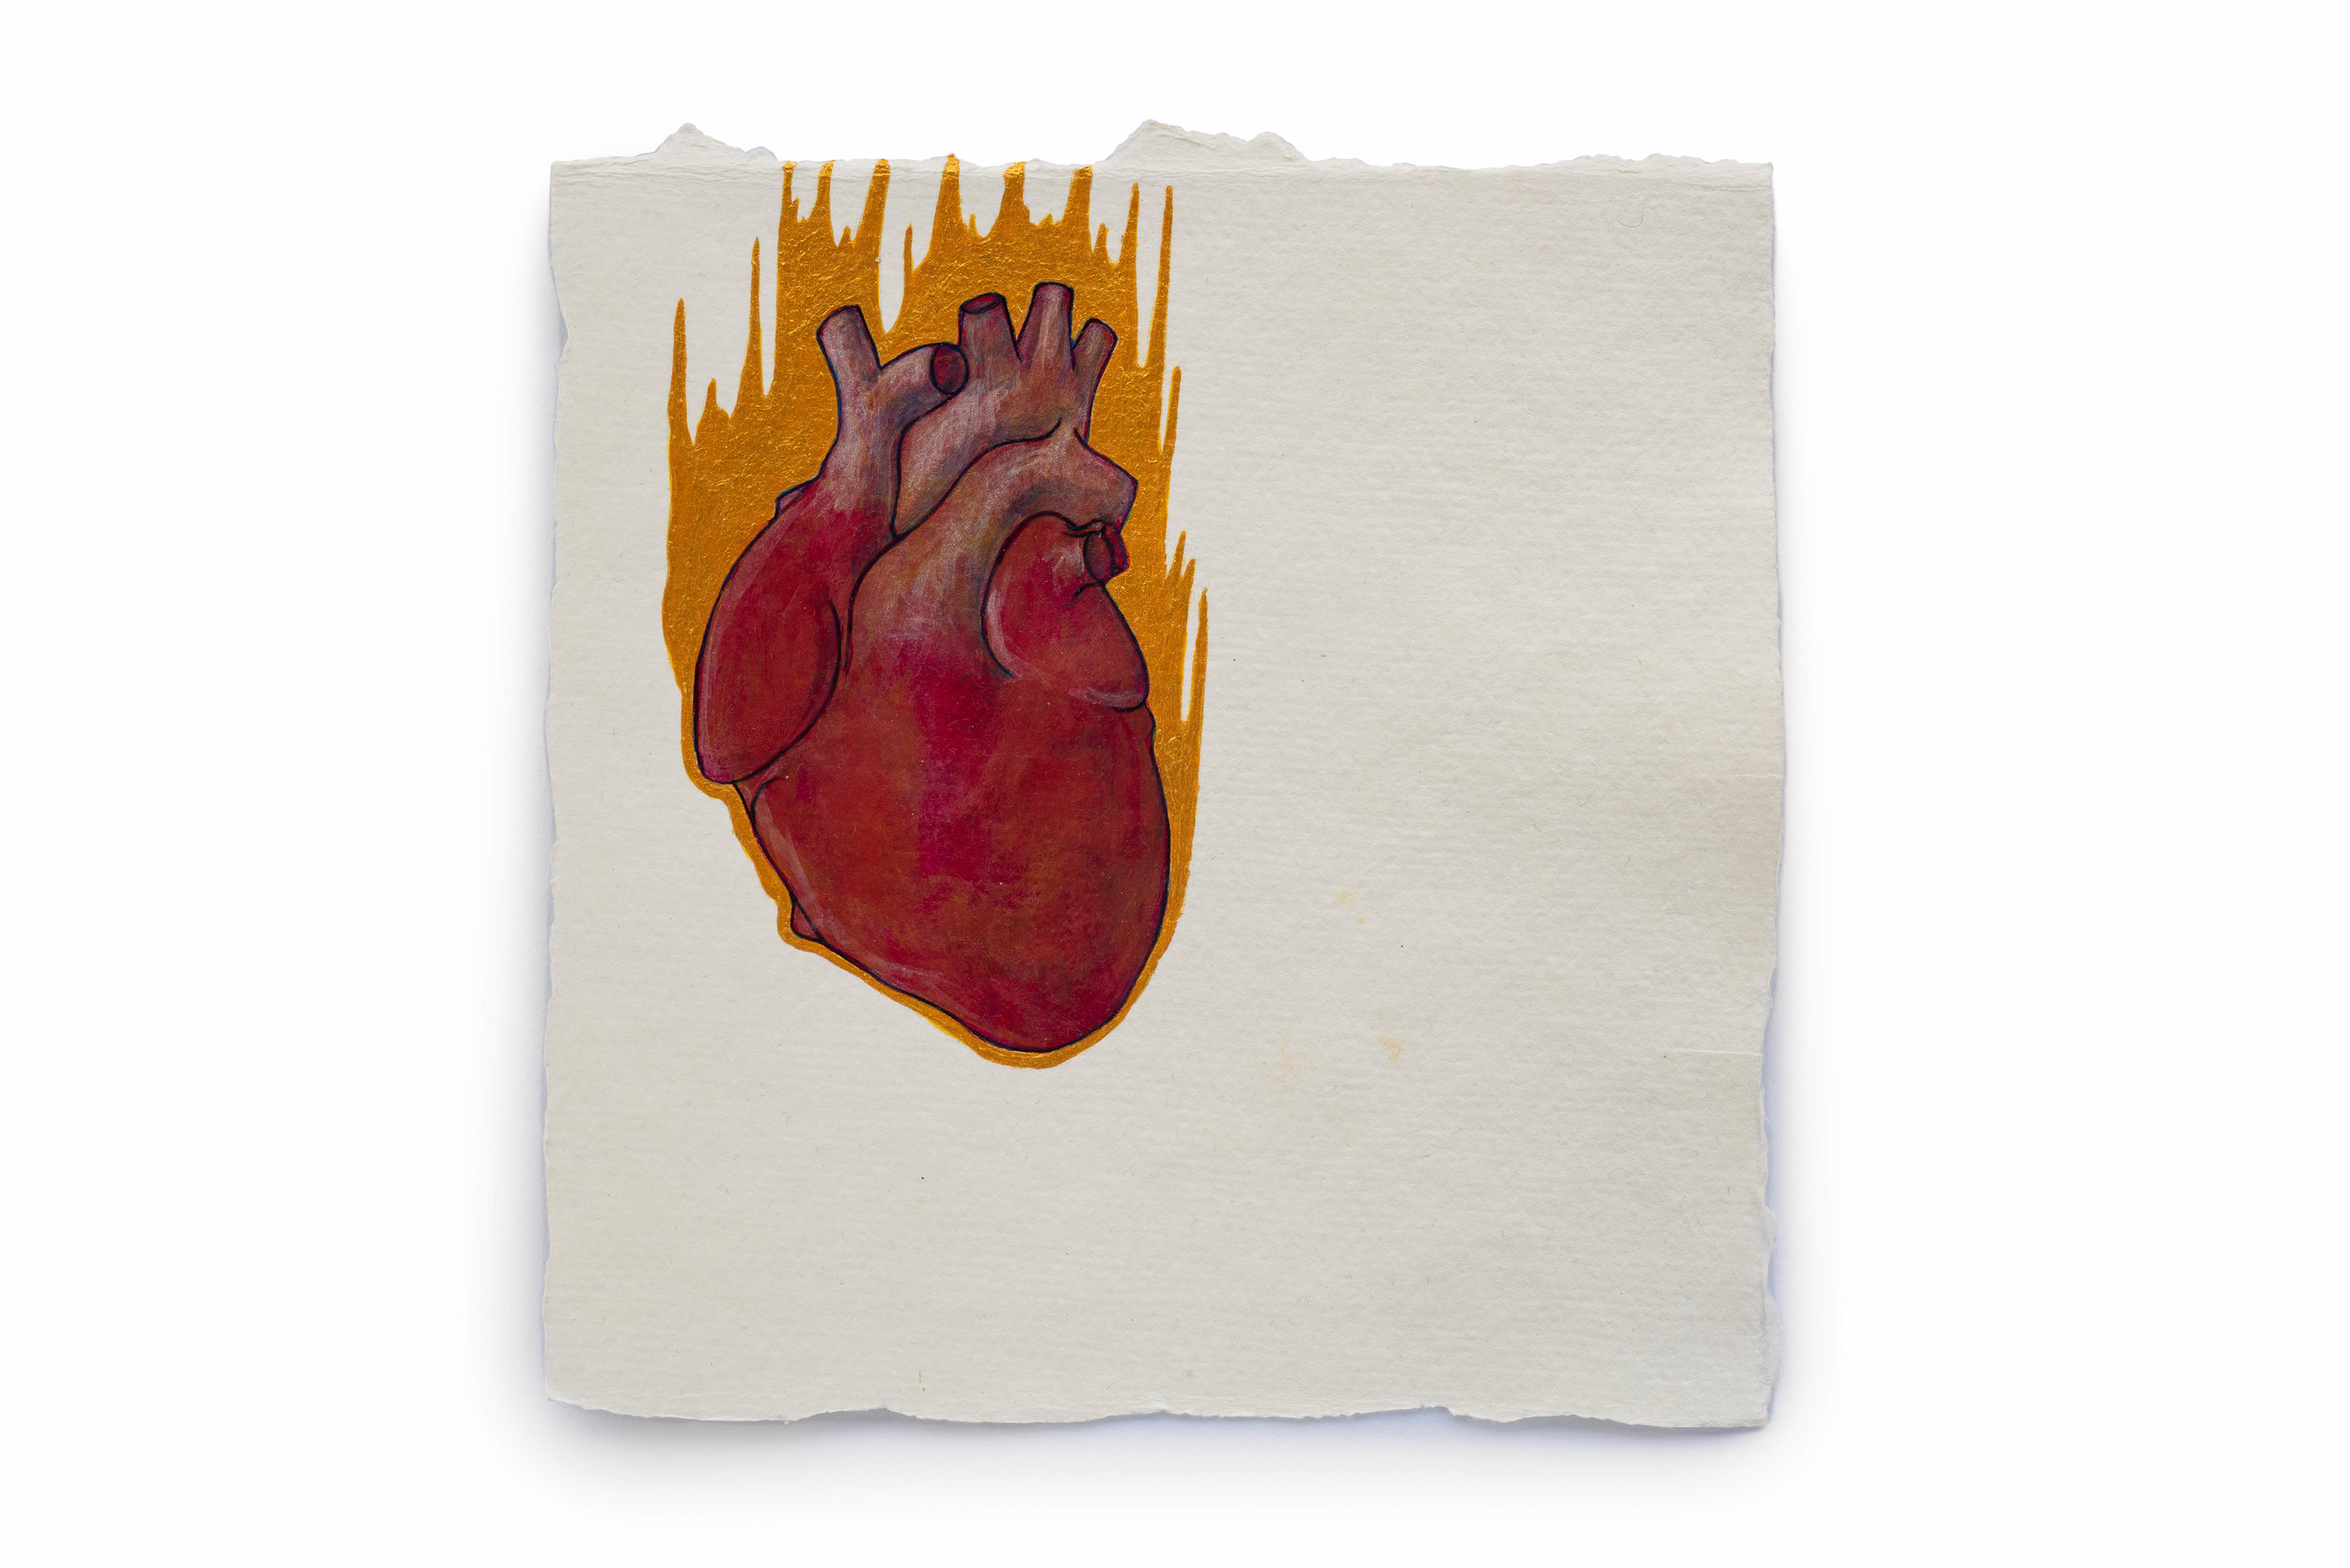   Fire Diary (flaming heart),  2018 Acrylic on paper, 6” x 6”    View Next Set →   